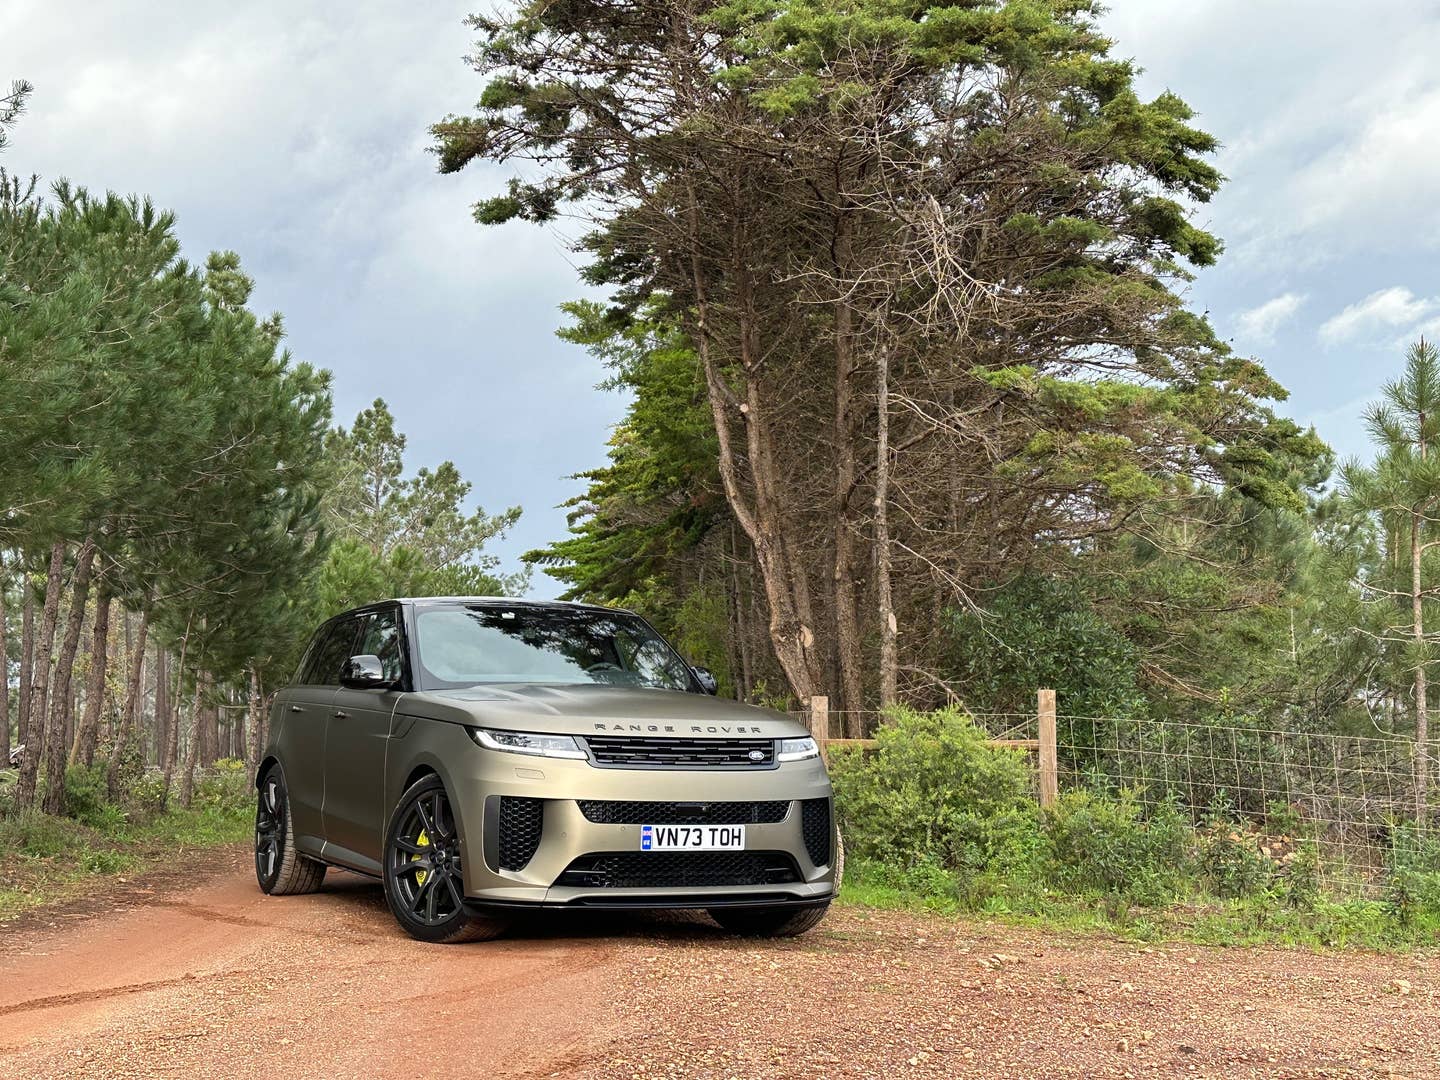 The Range Rover Sport SV Has Seats With Haptic Audio. But Are They Any Good?